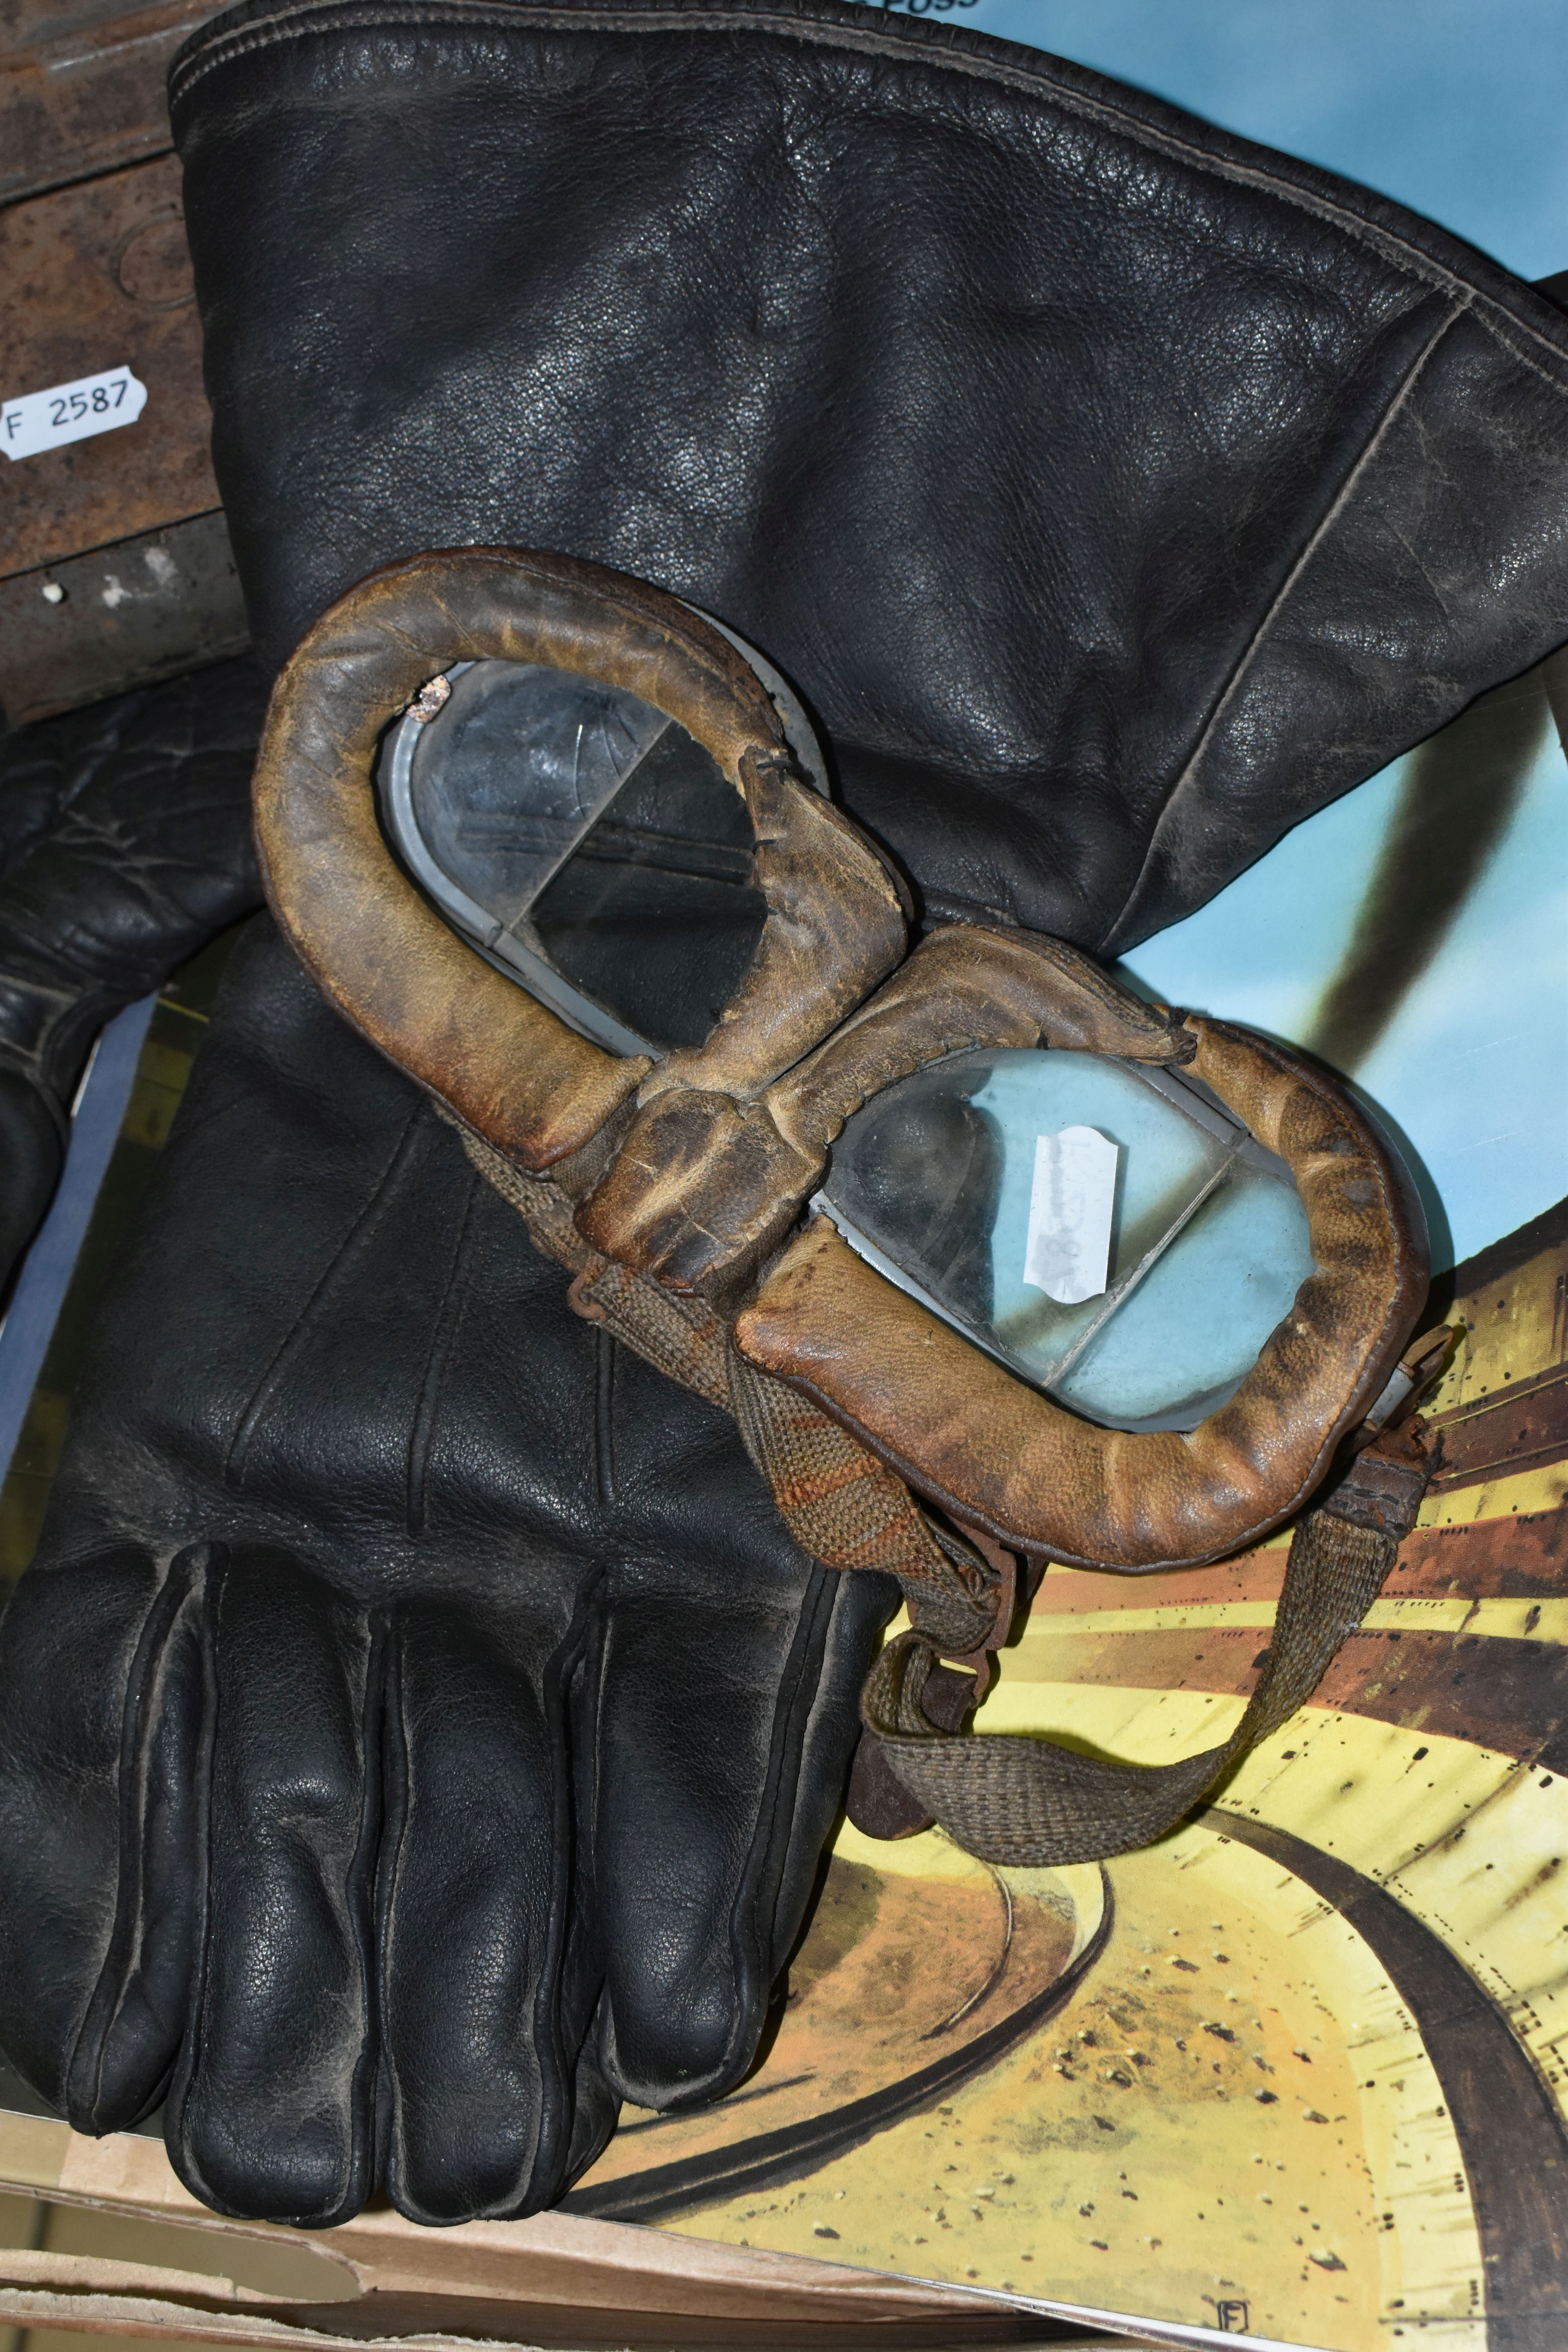 A PAIR OF MILLETS VINTAGE LEATHER GAUNTLETS, wool lined, some marking and wear, with a pair of - Image 2 of 4